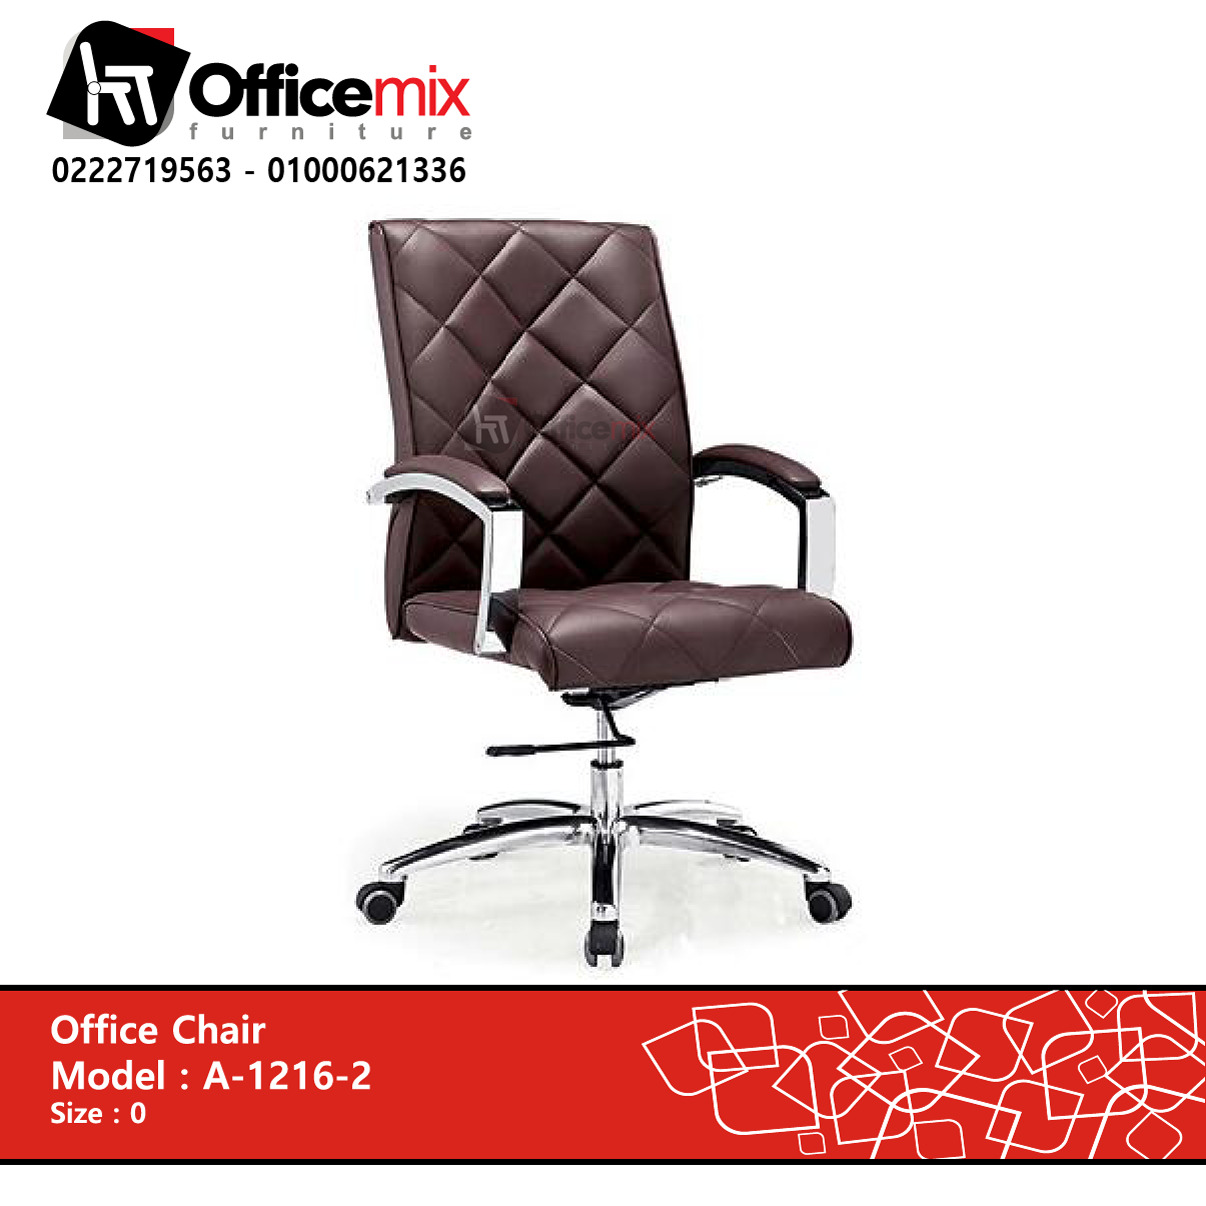 office mix manager chair A-1216-2